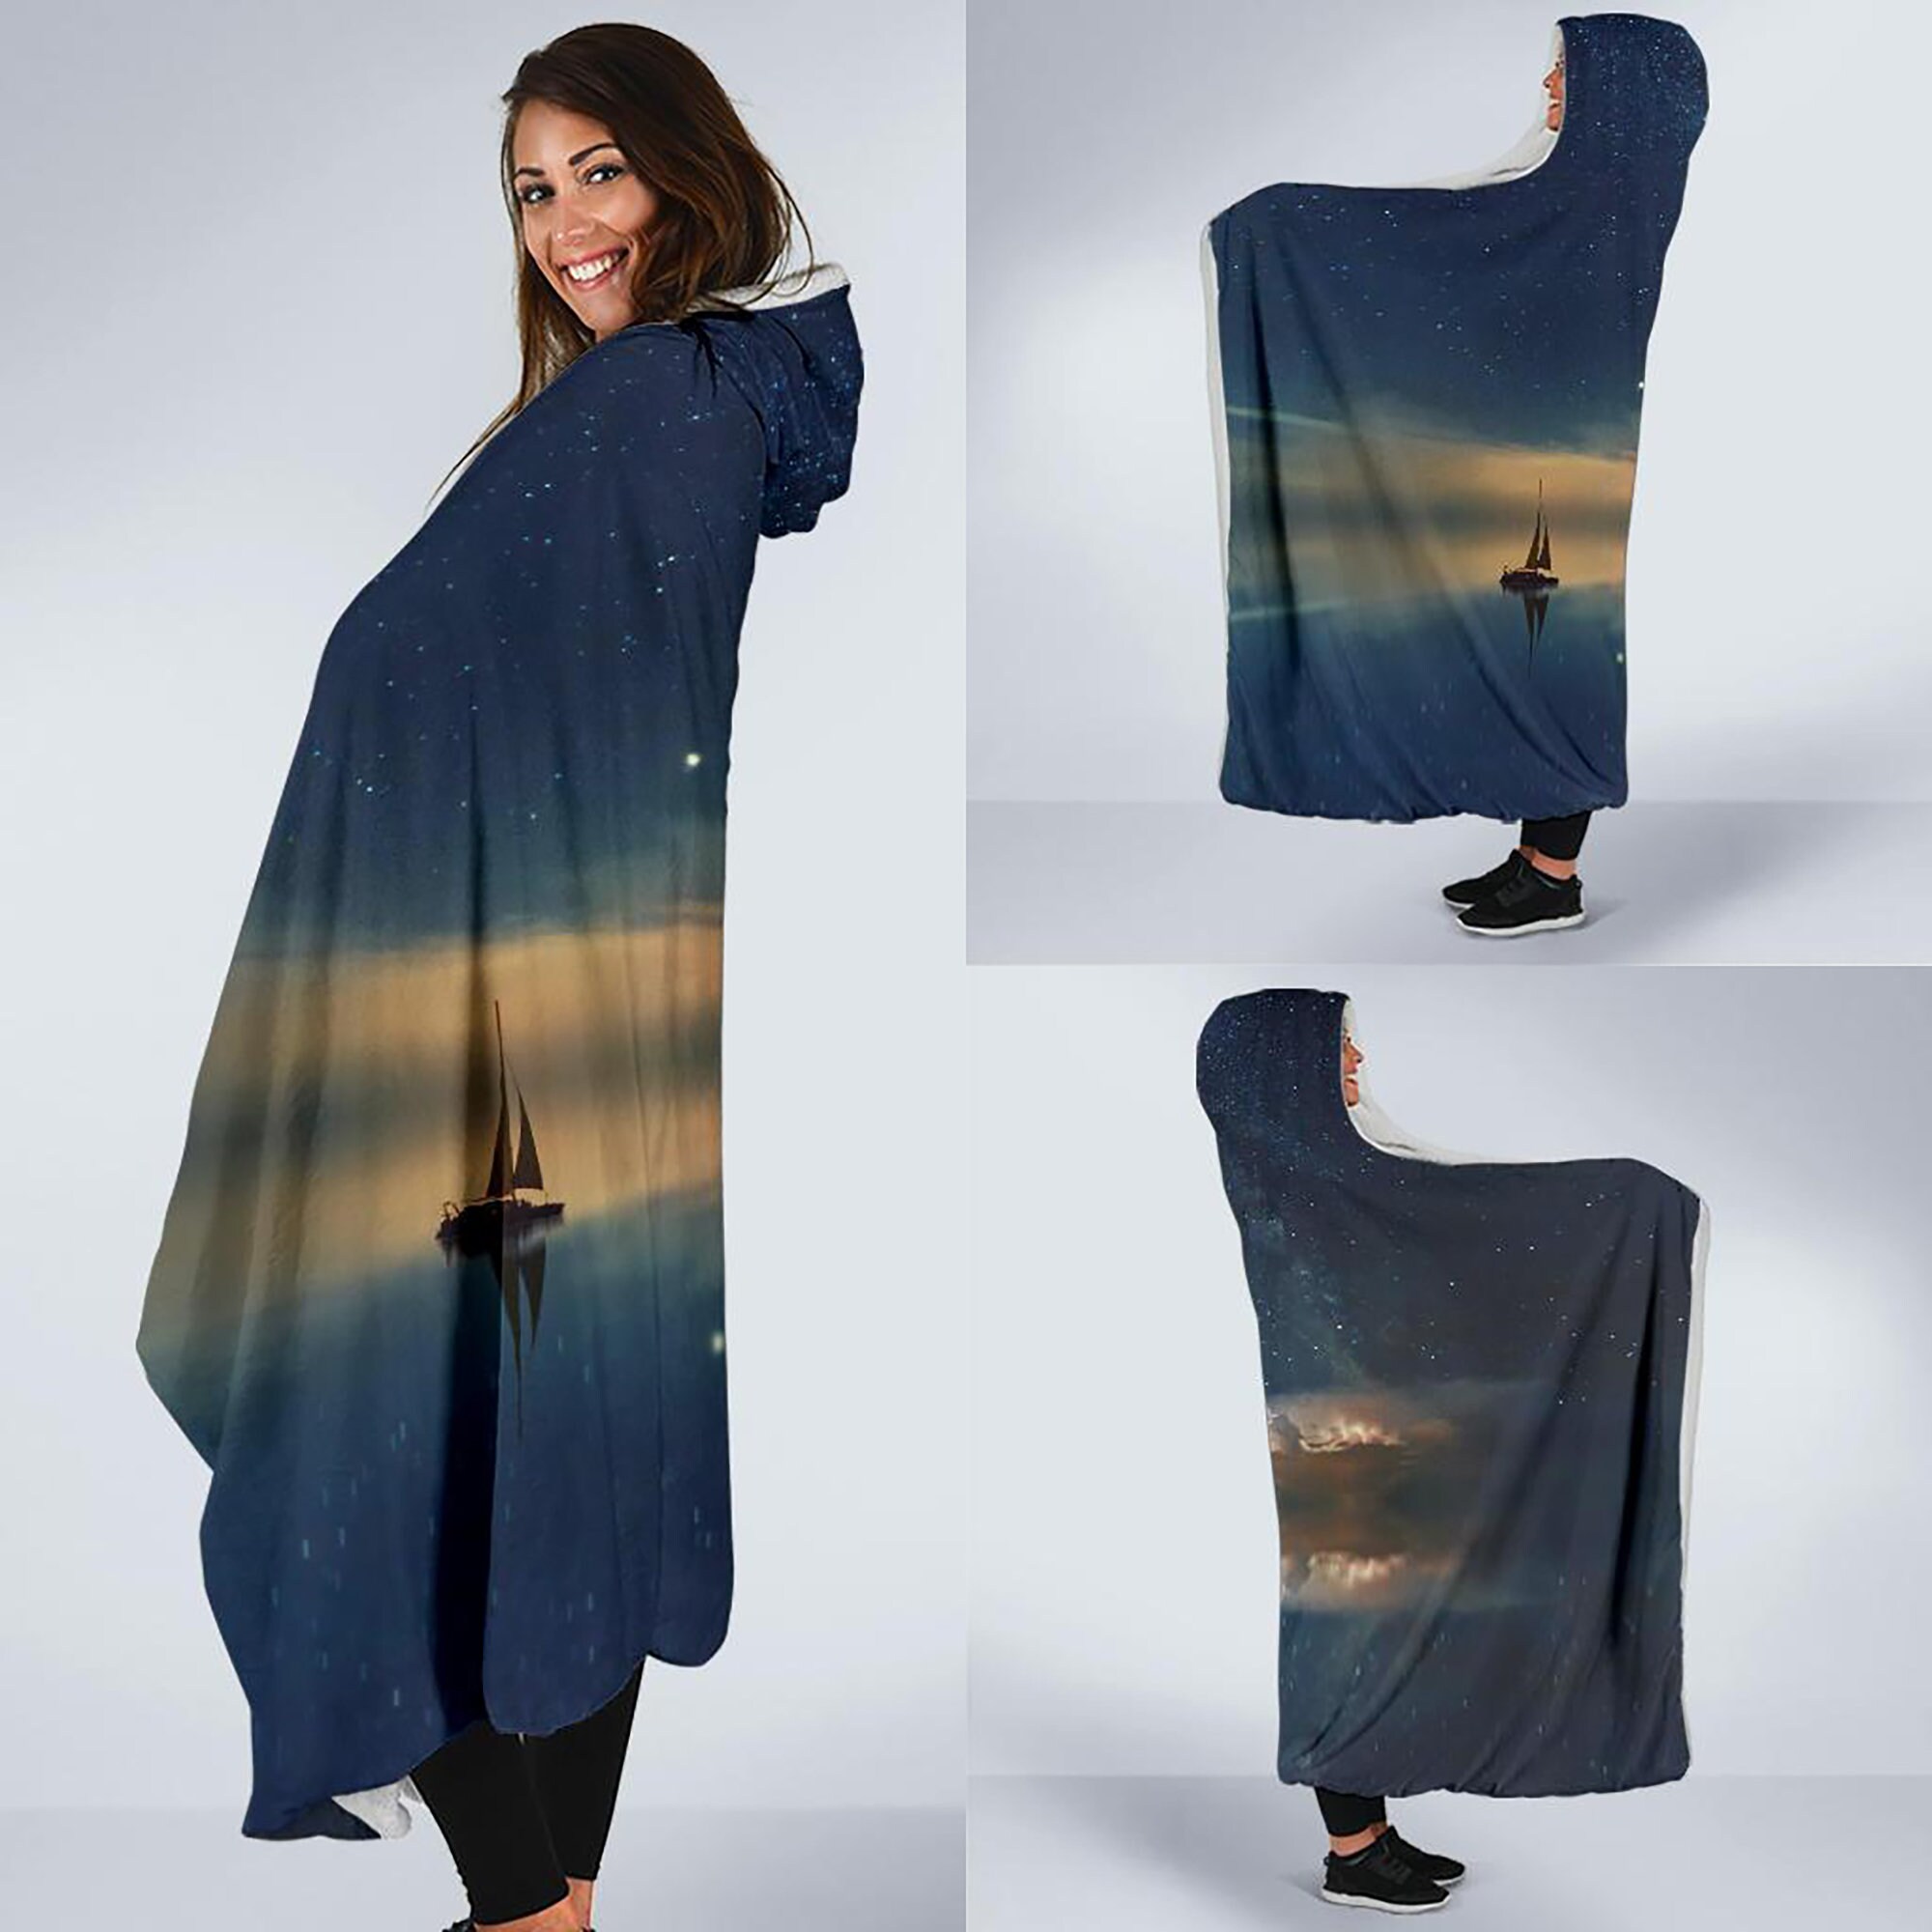 Milky Way Sail Hooded Blanket, Adult and Youth Sizes, Soft Fleece Blanket with a Hood Galaxy Stars Outer Space Throw